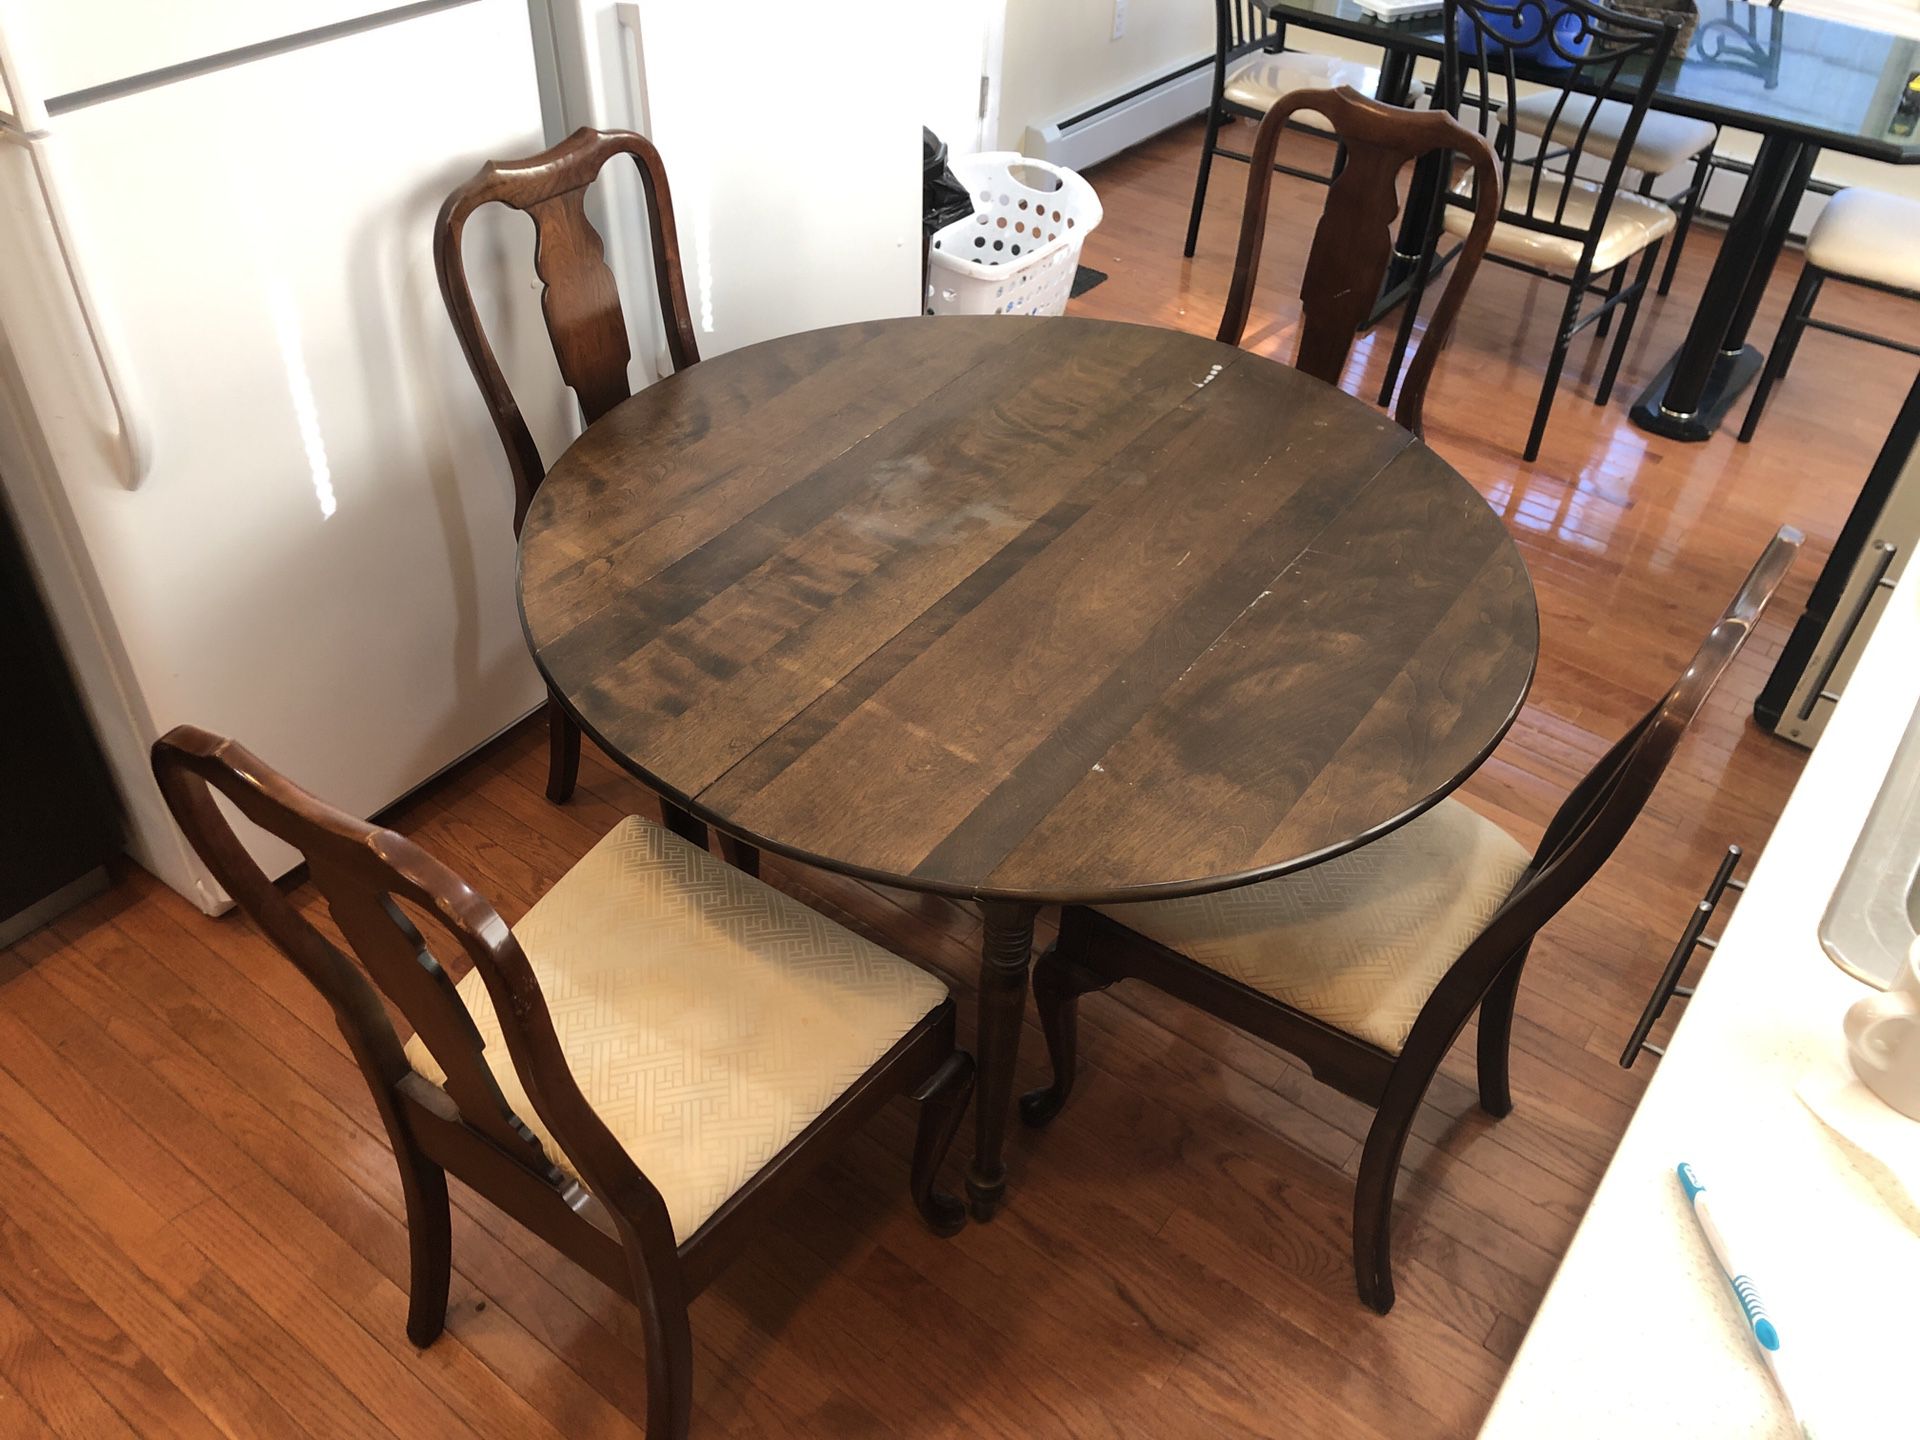 Fold out kitchen table + 4 chairs